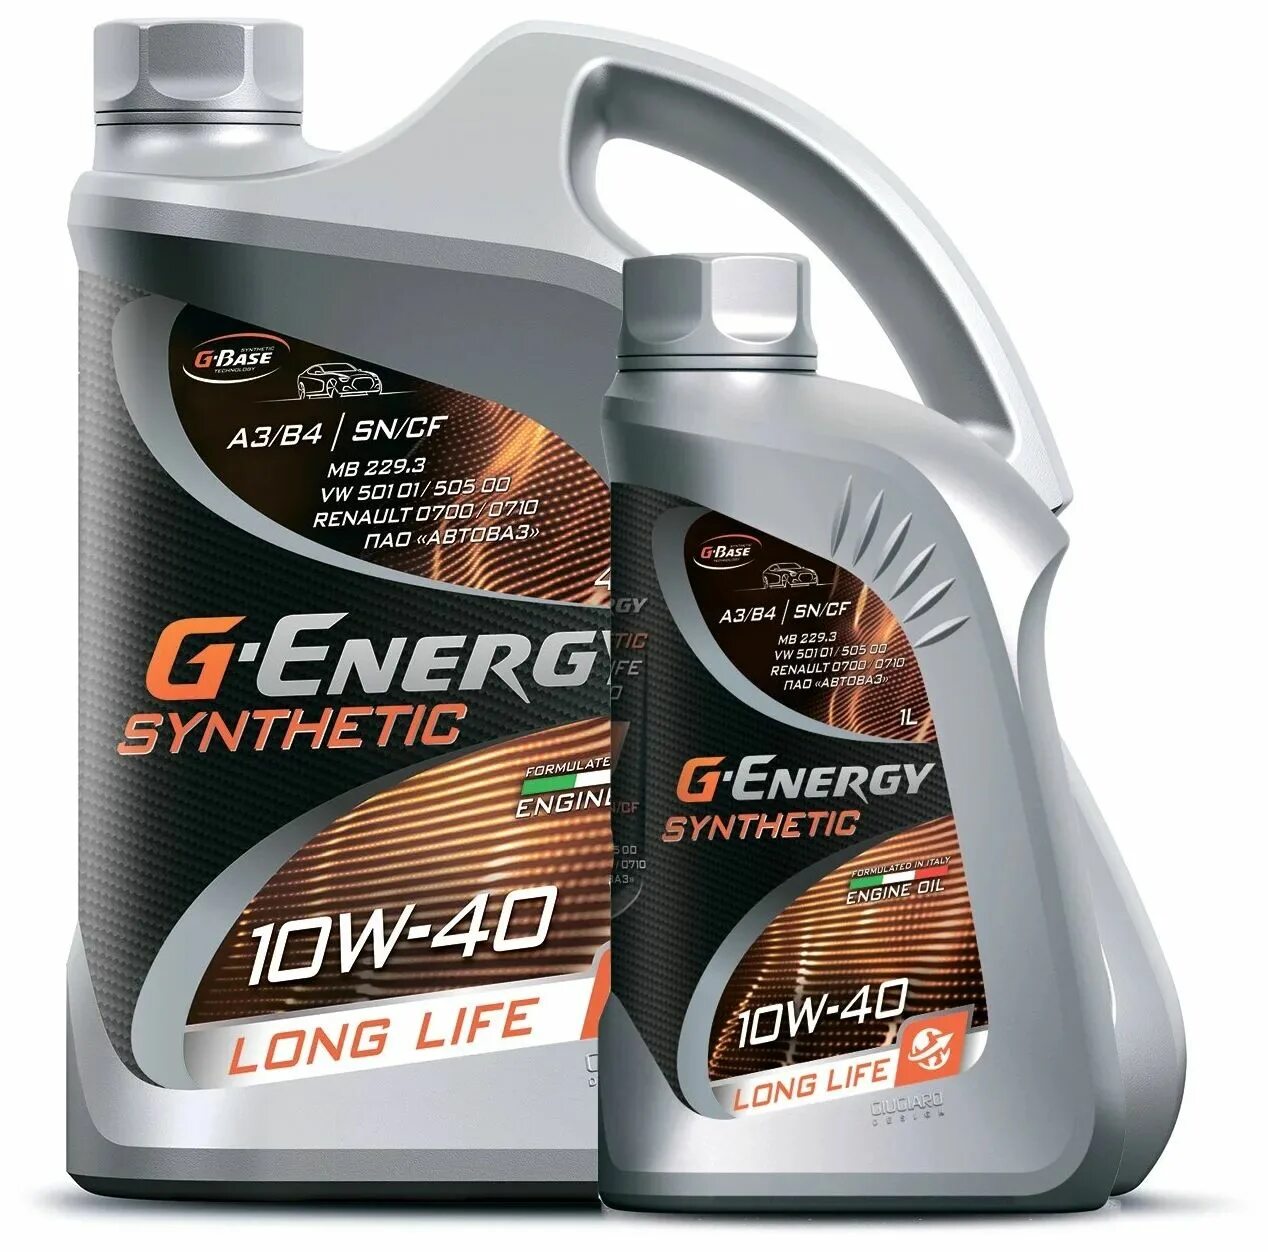 G-Energy Synthetic far East 5w-30 4л. G-Energy 5w30 Synthetic. G-Energy Synthetic Active 5w-30. G Energy 5w30 синтетика Active 1 л. Лучшее масло g energy